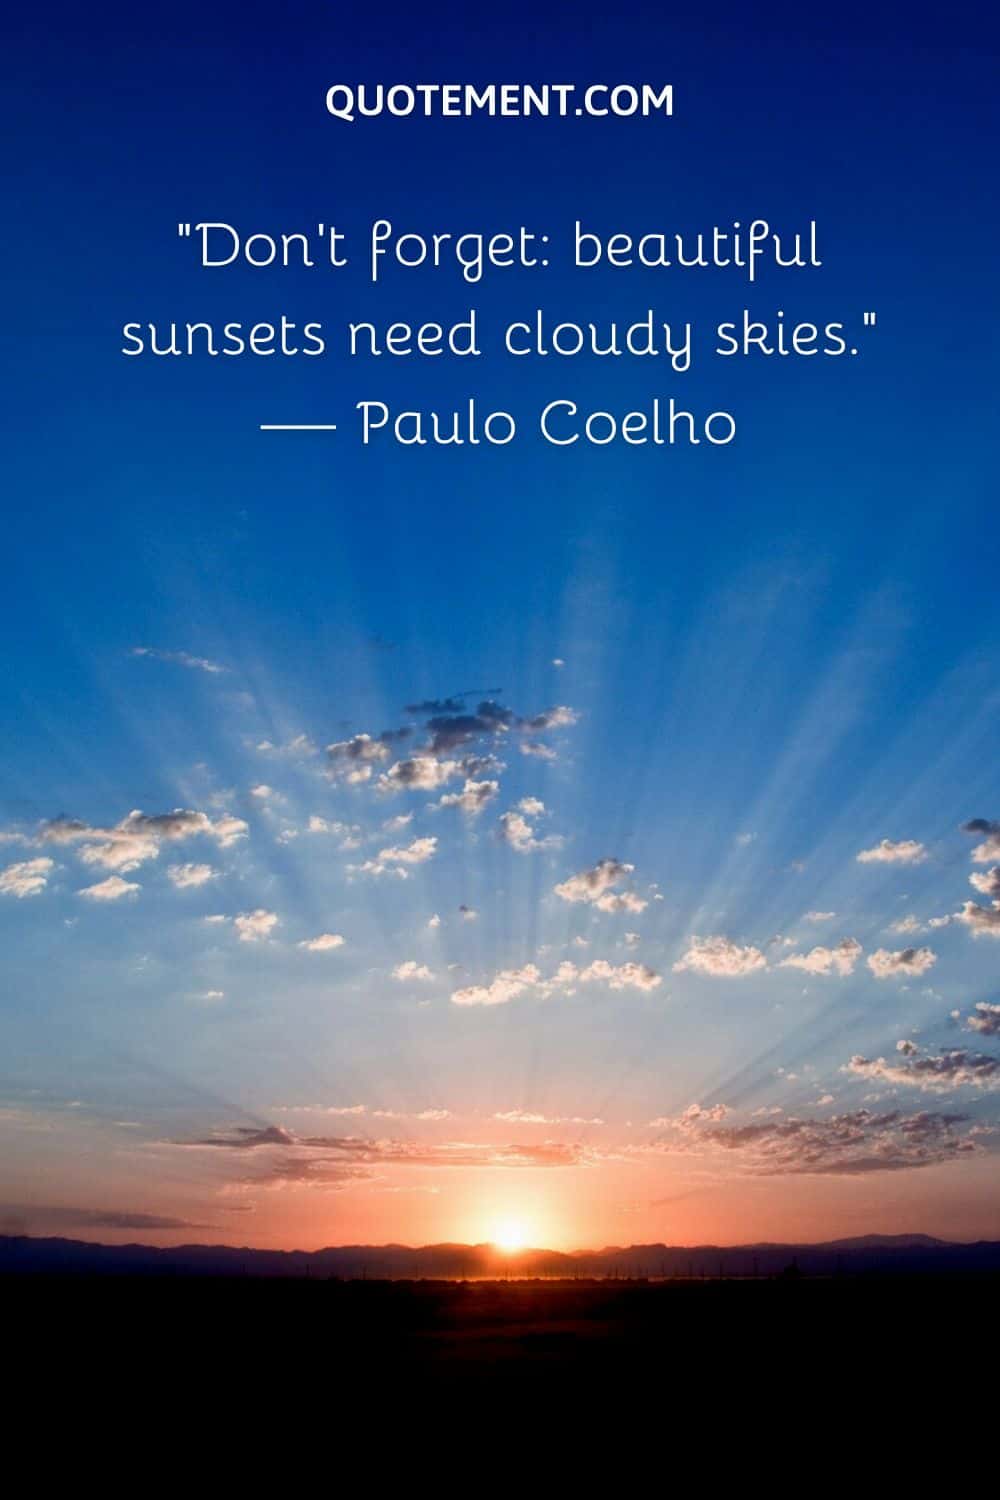 Don’t forget beautiful sunsets need cloudy skies